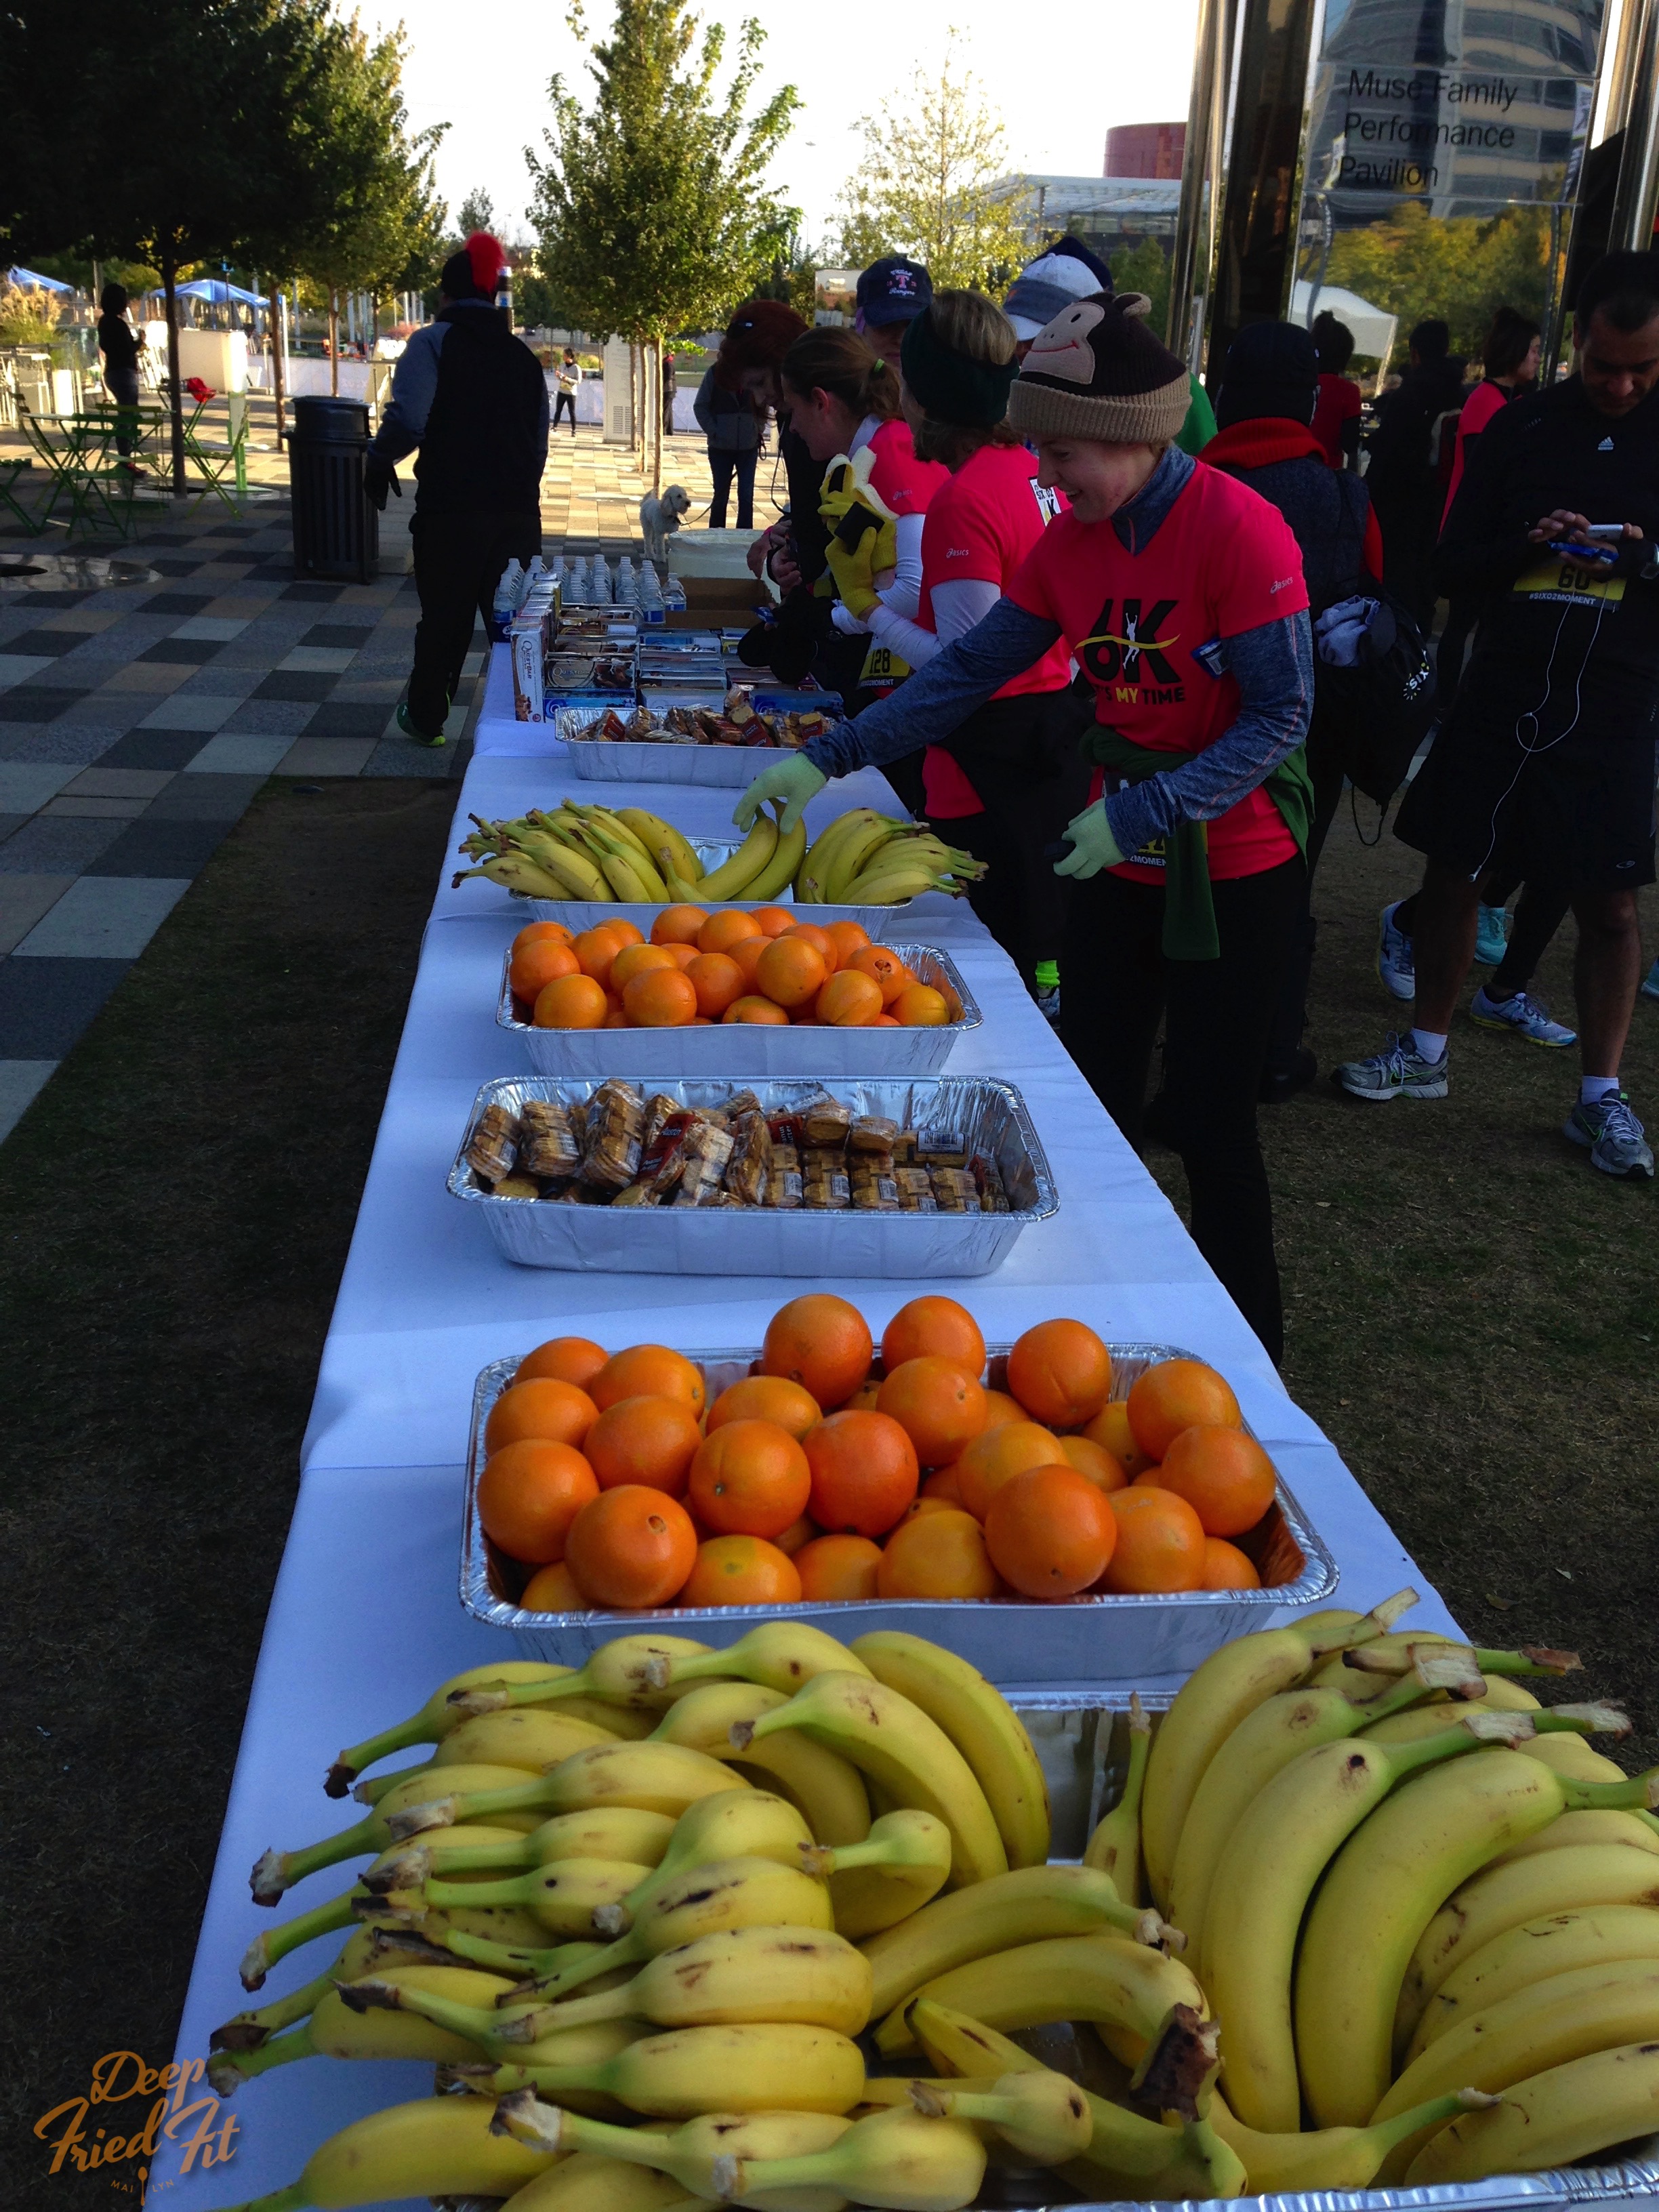 Time to refuel with oranges, bananas, quest bars, and hot chocolate!